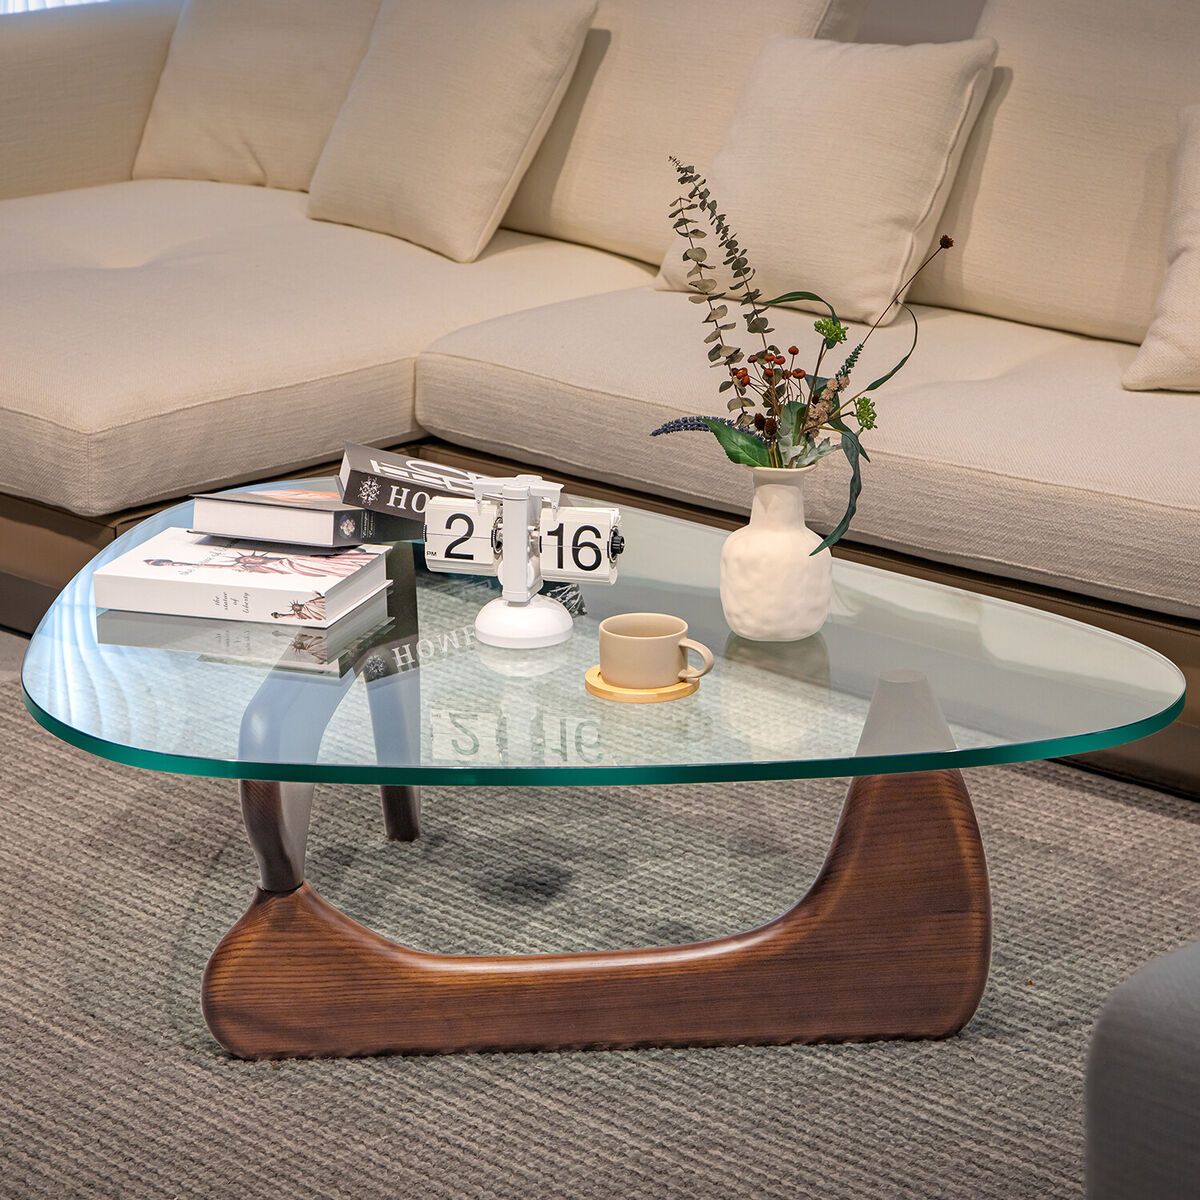 Glass Coffee Table 19 Mm Tempered Noguchi Style Solid Wood Design Living  Room | Ebay Within Tempered Glass Coffee Tables (View 3 of 15)